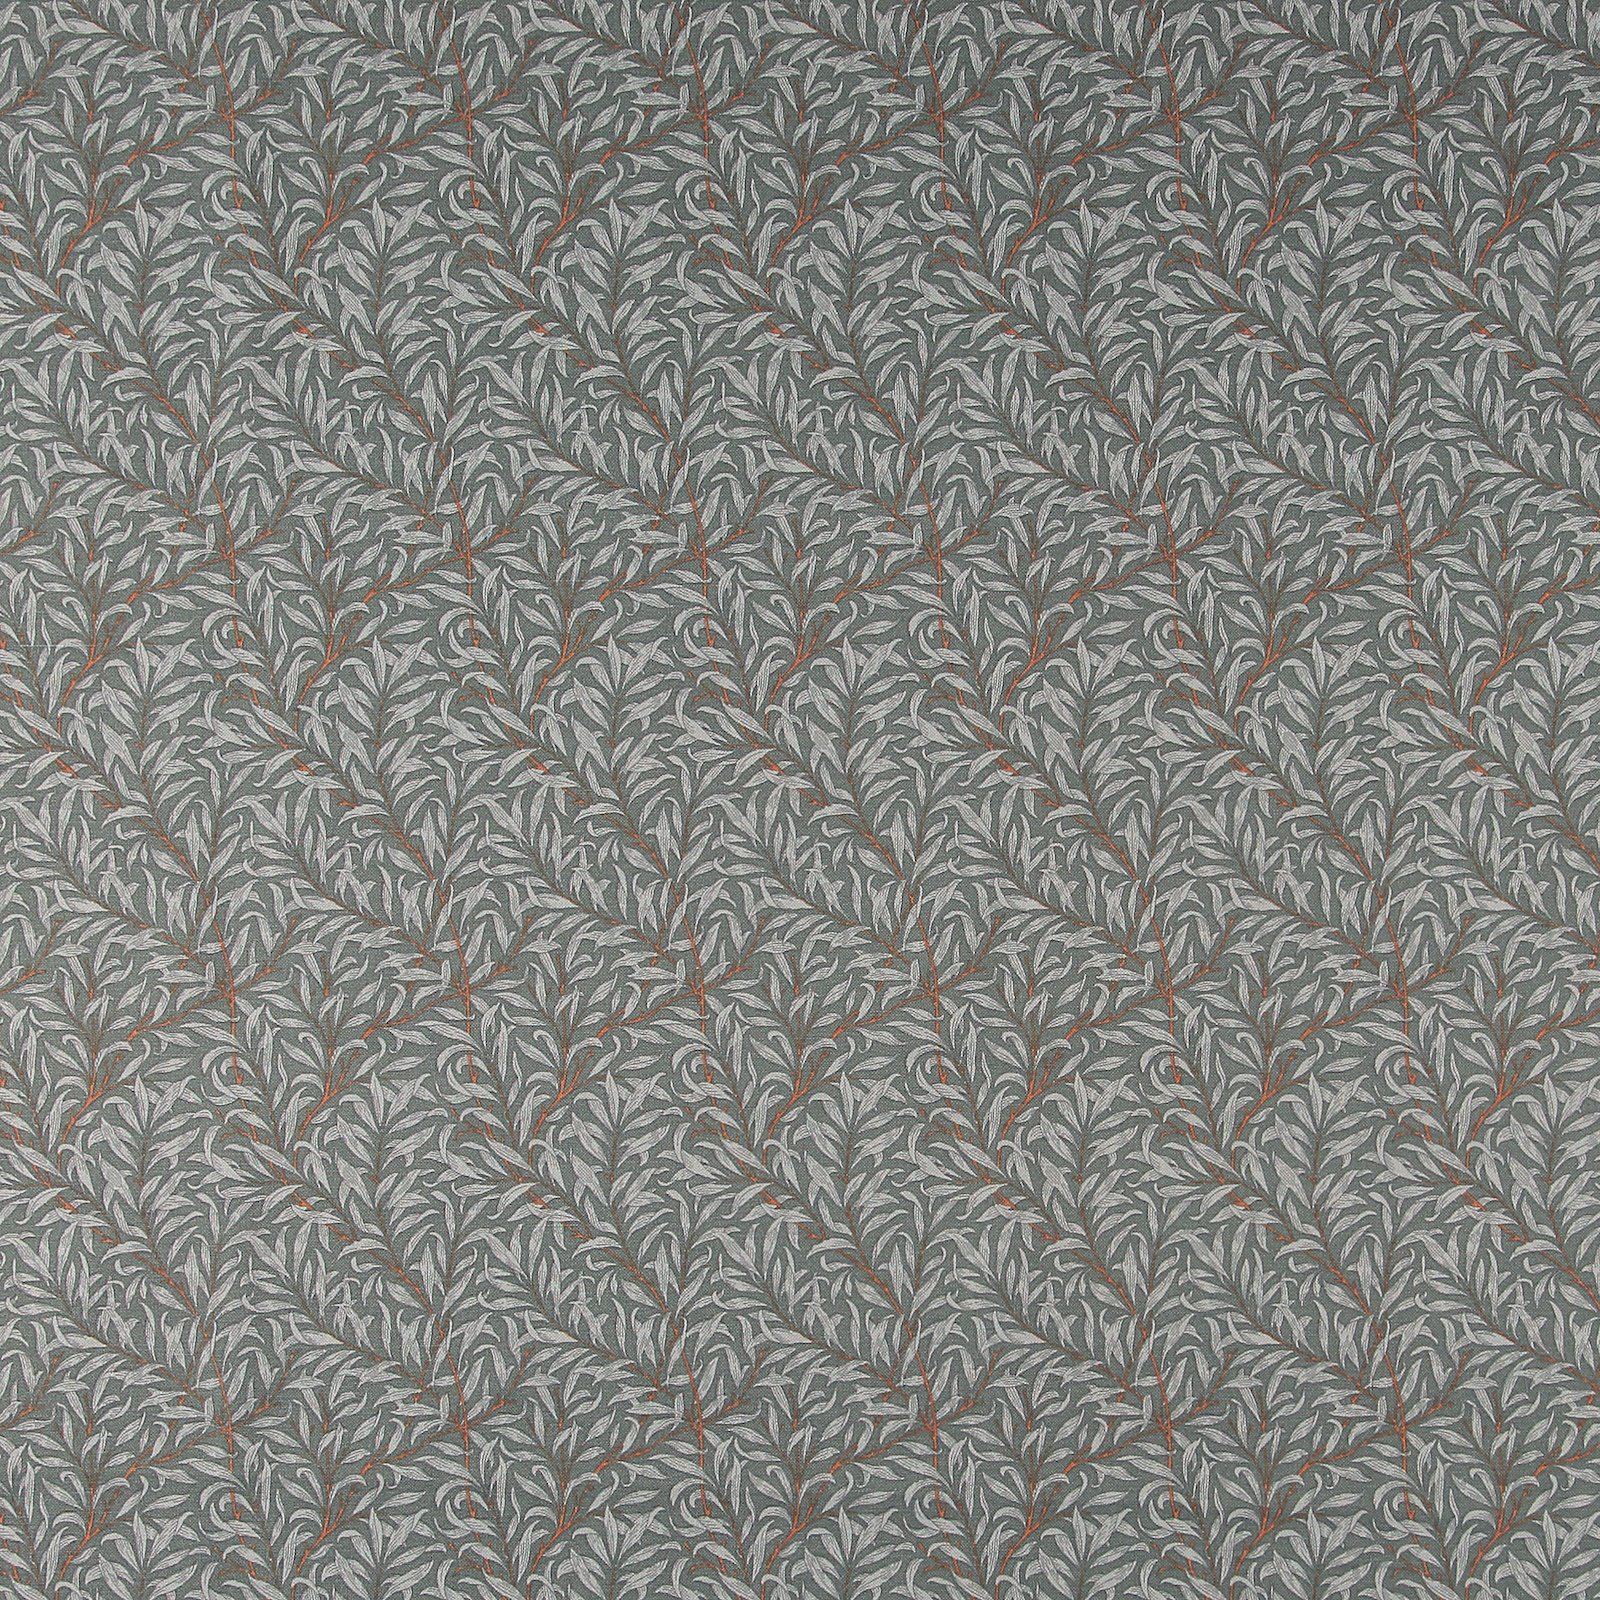 Halfpanama grey with leaves 816284_pack_sp